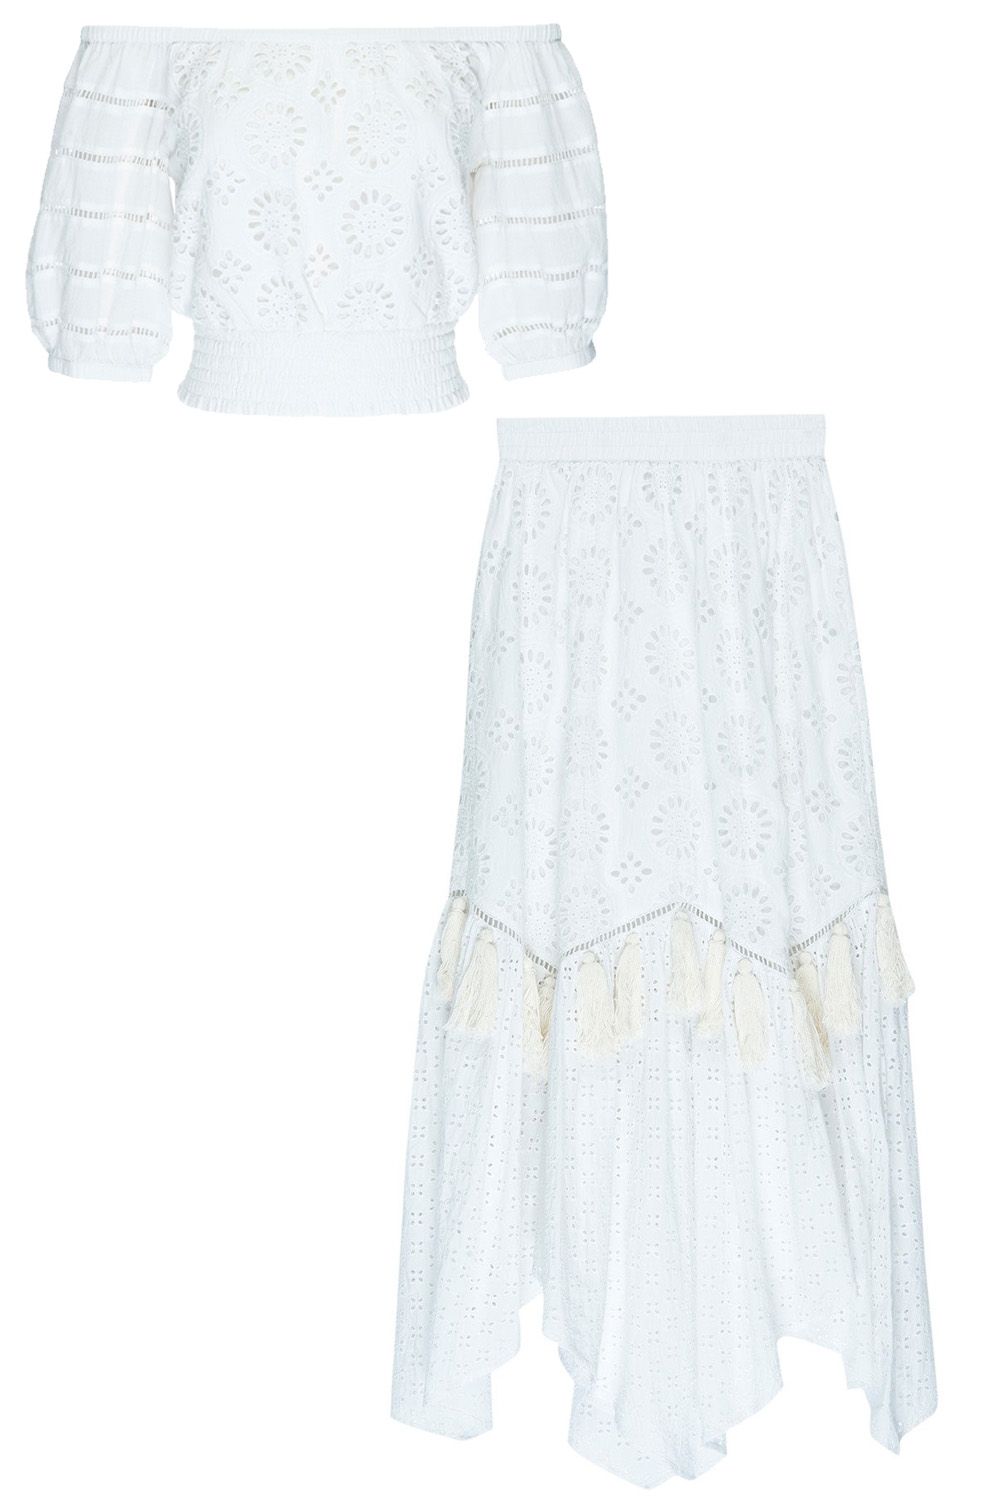 matching top for white skirt